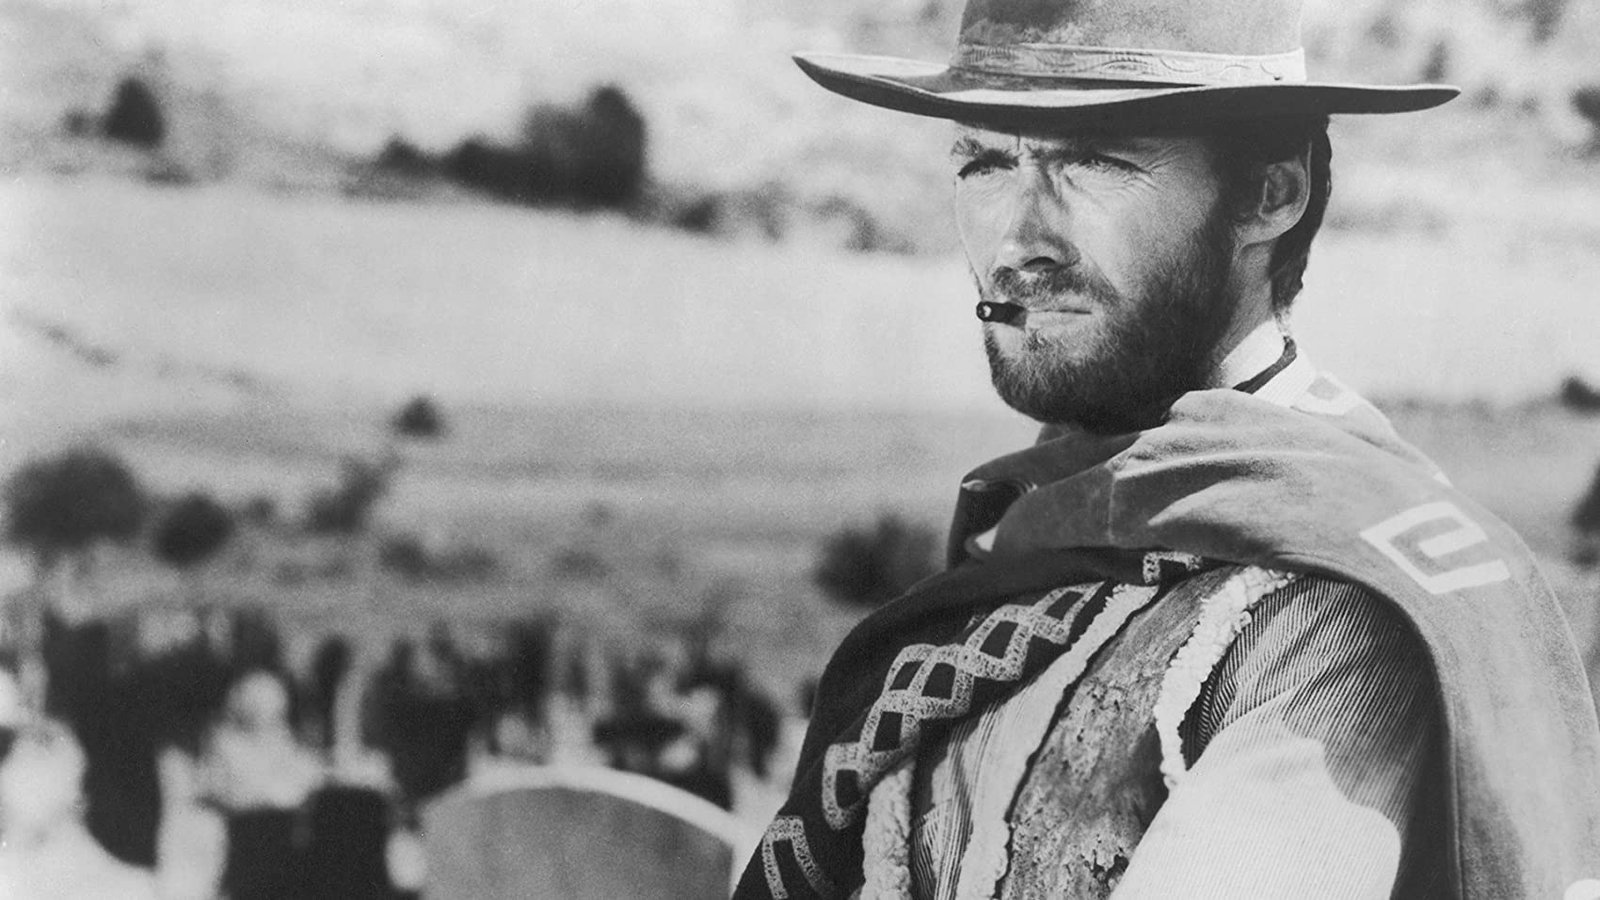 Best Action Movies on Amazon Prime: The Good, The Bad, and The Ugly